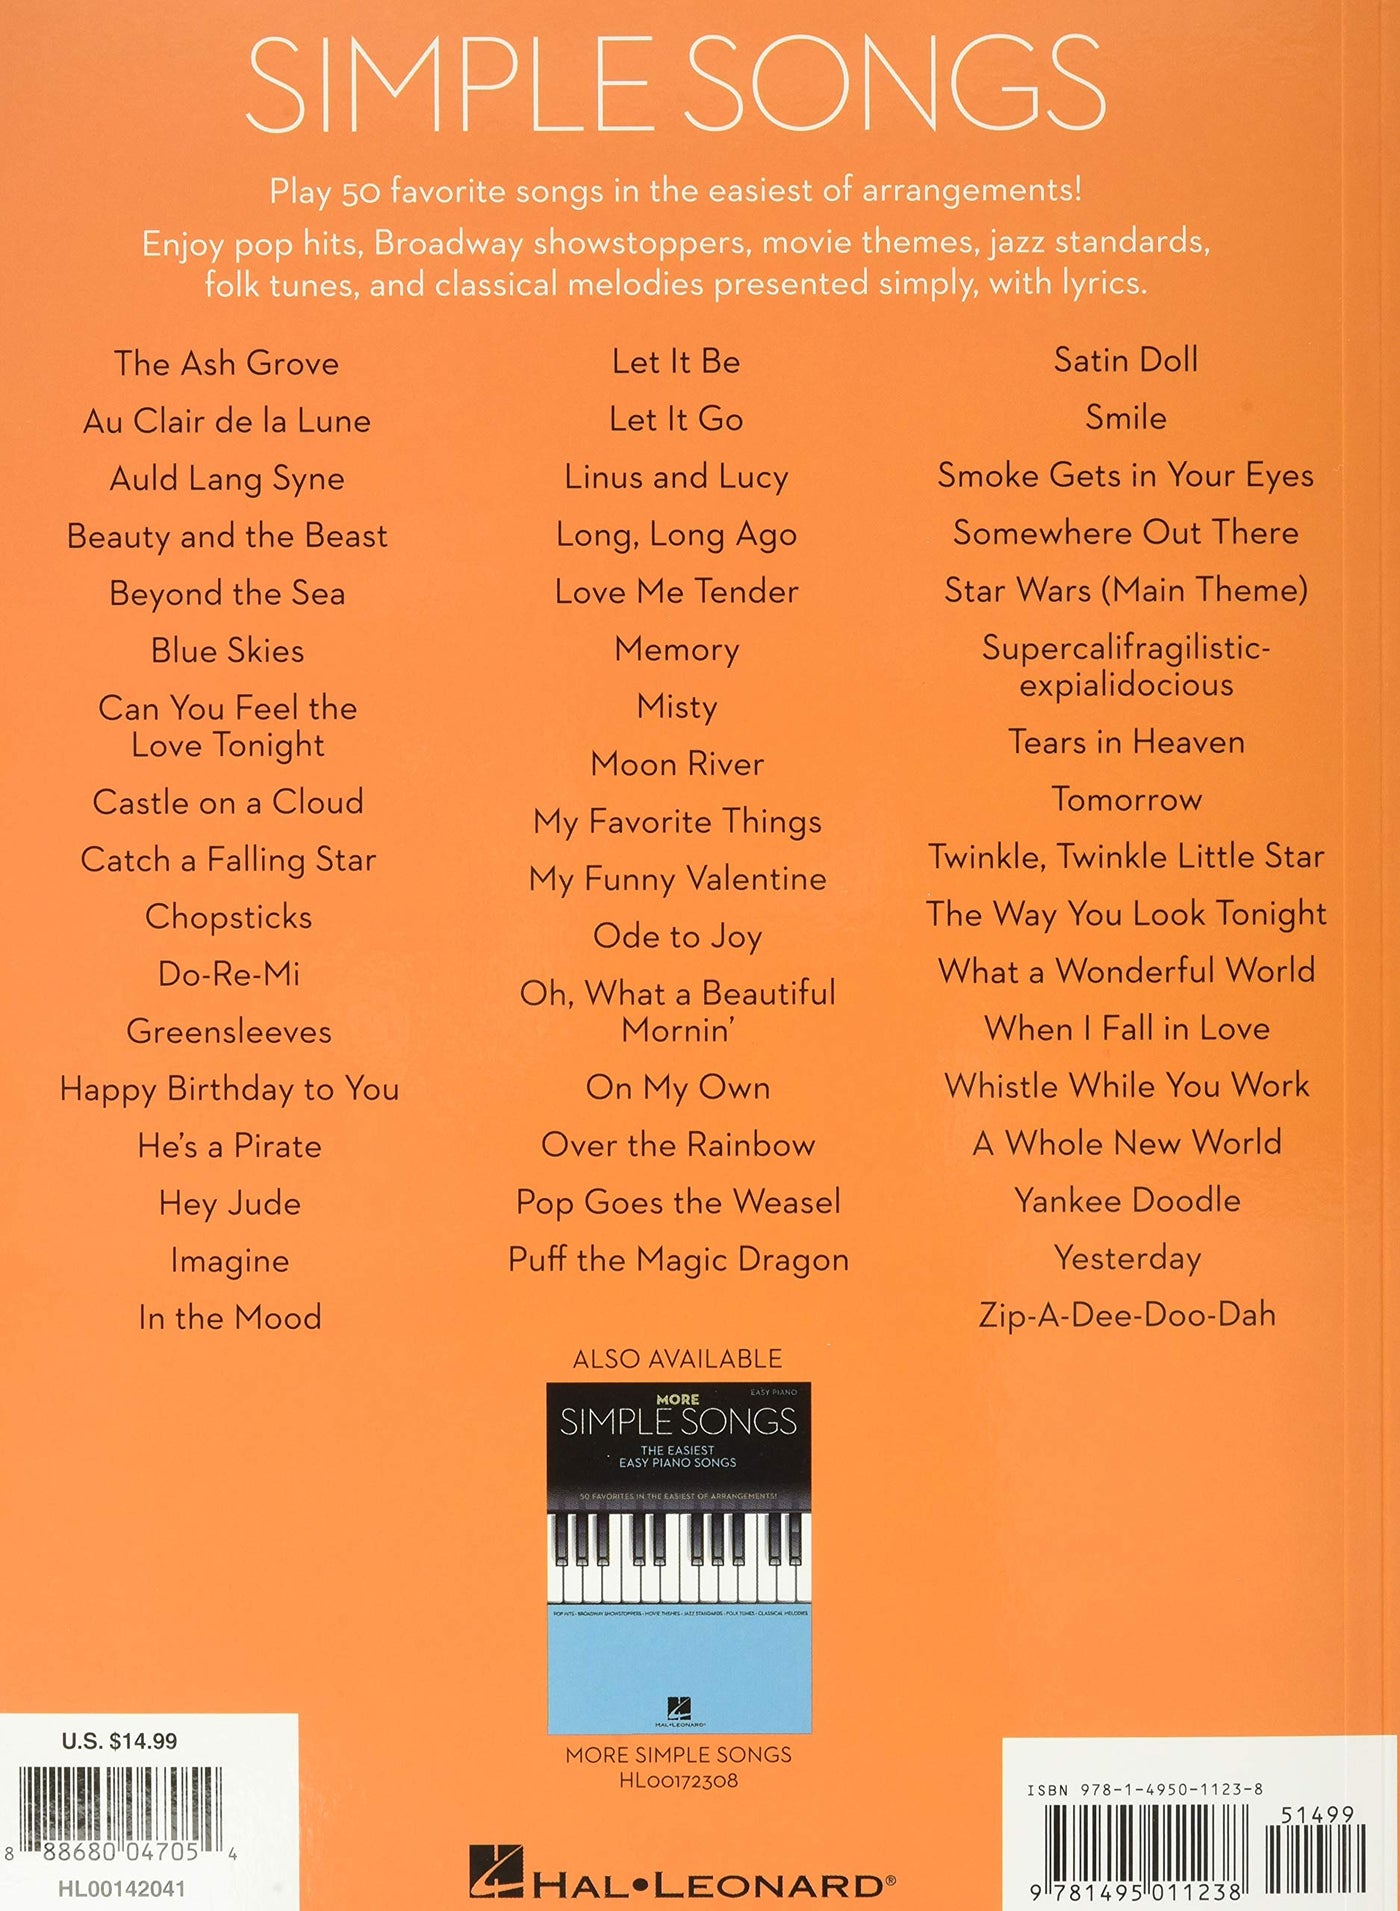 Simple Songs - The Easiest Easy Piano Songs (Spiral Bound)